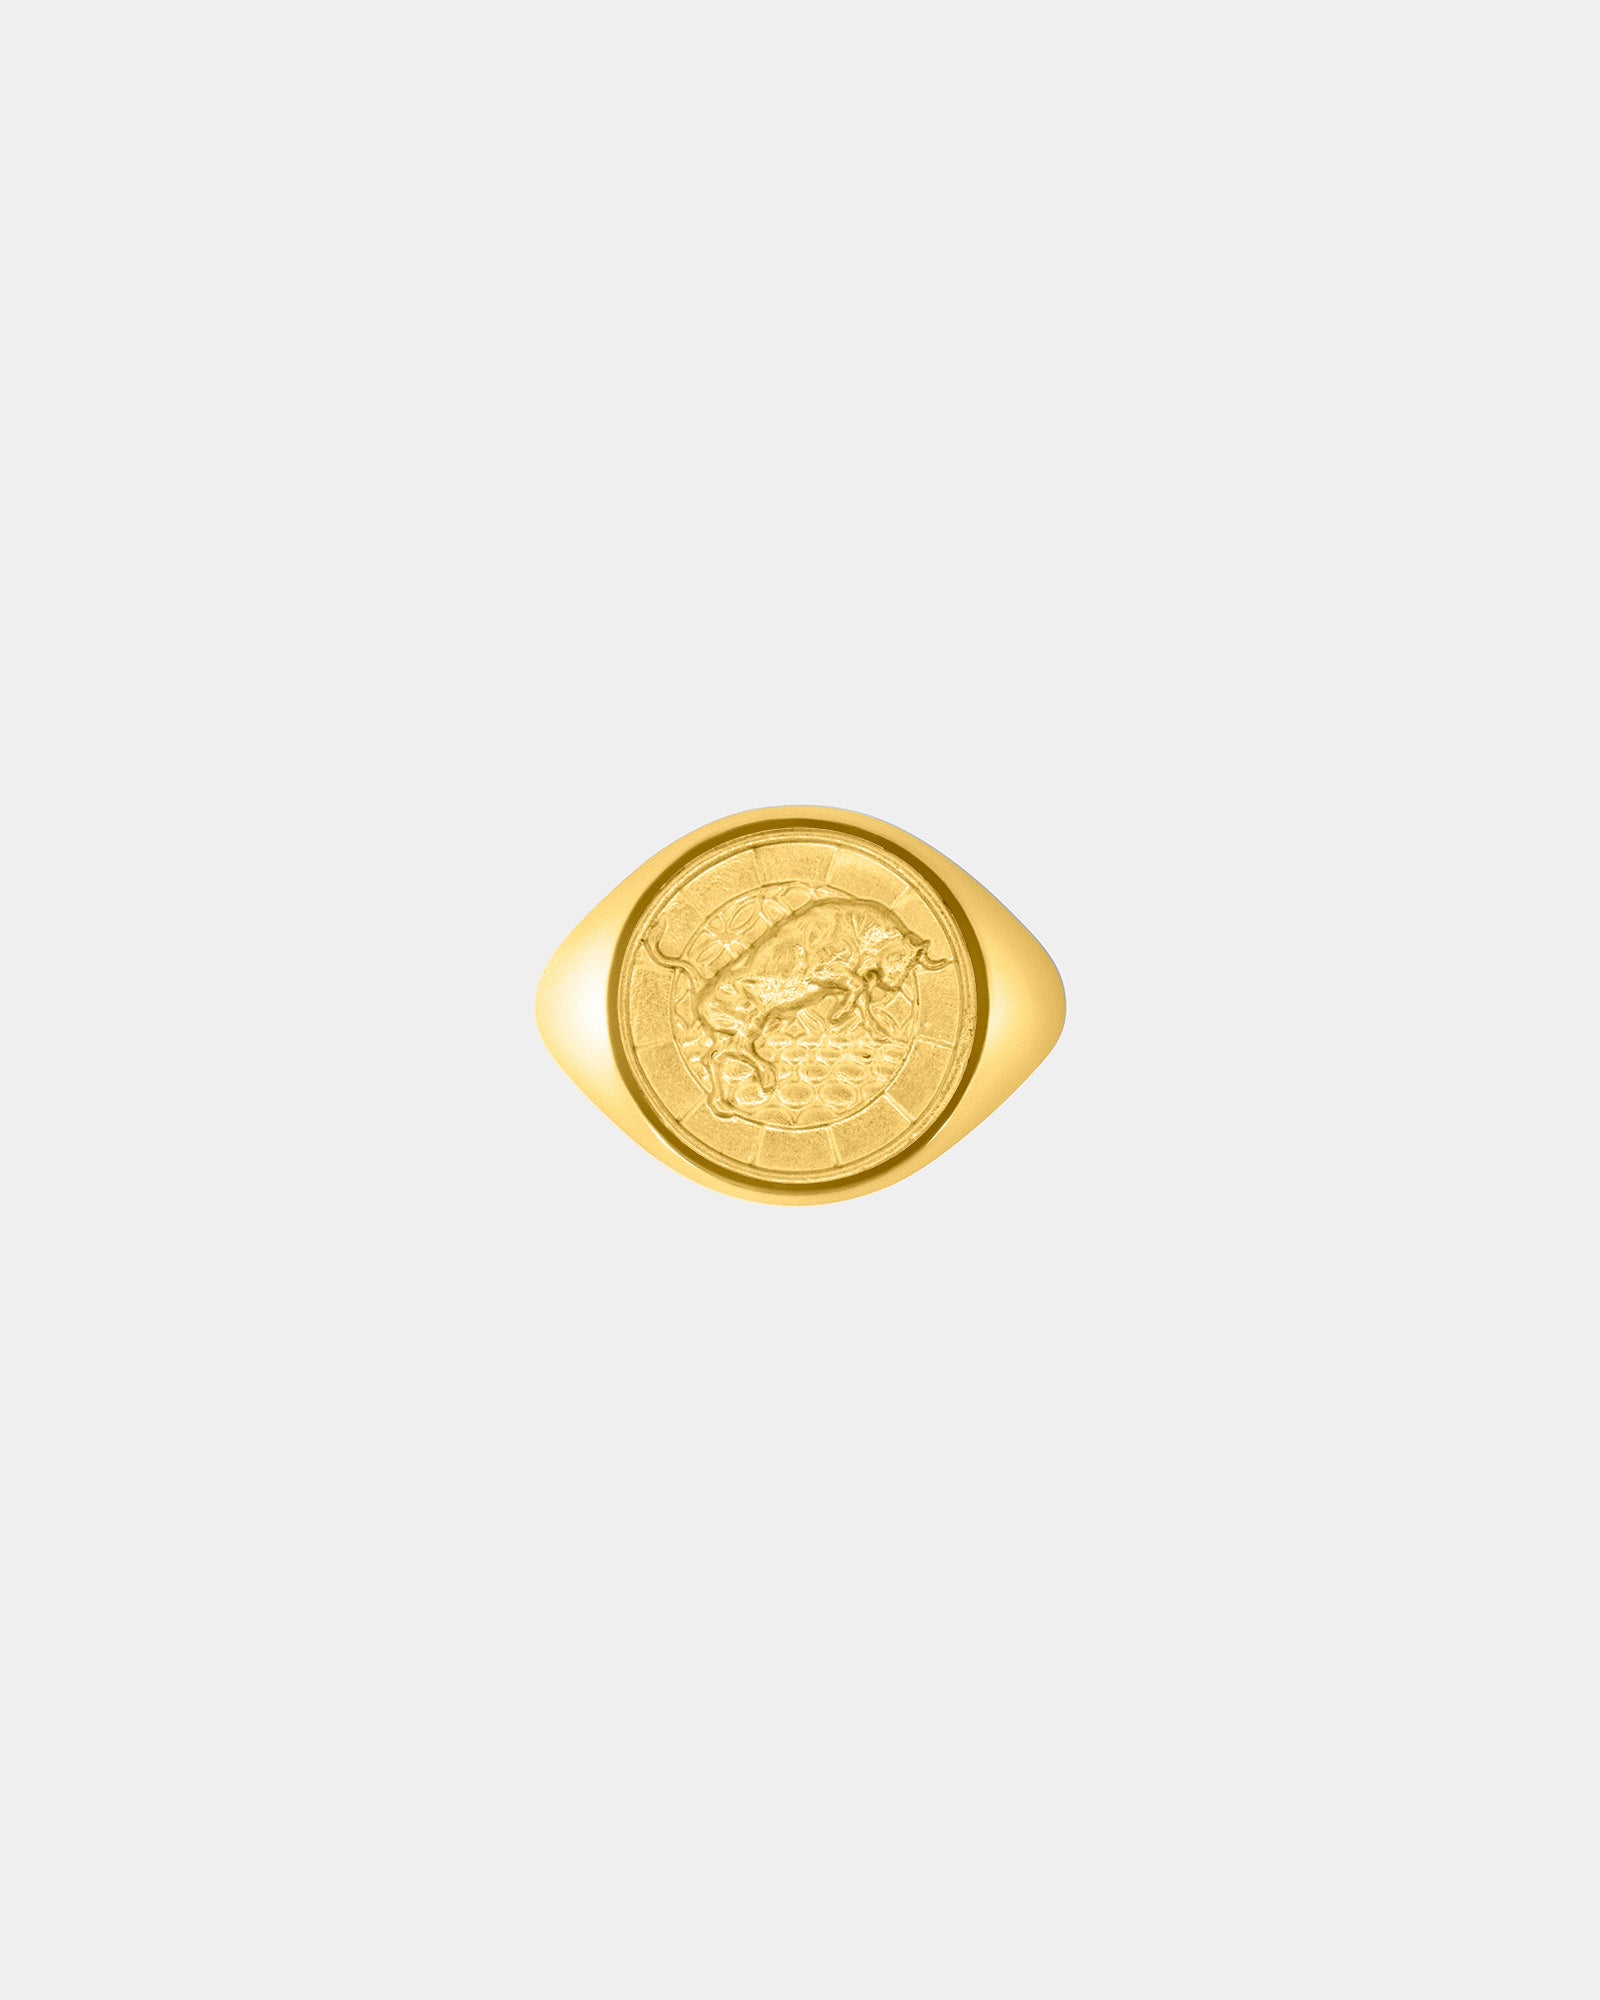 The Bull Large Signet Ring in 9k Yellow Gold by Wilson Grant